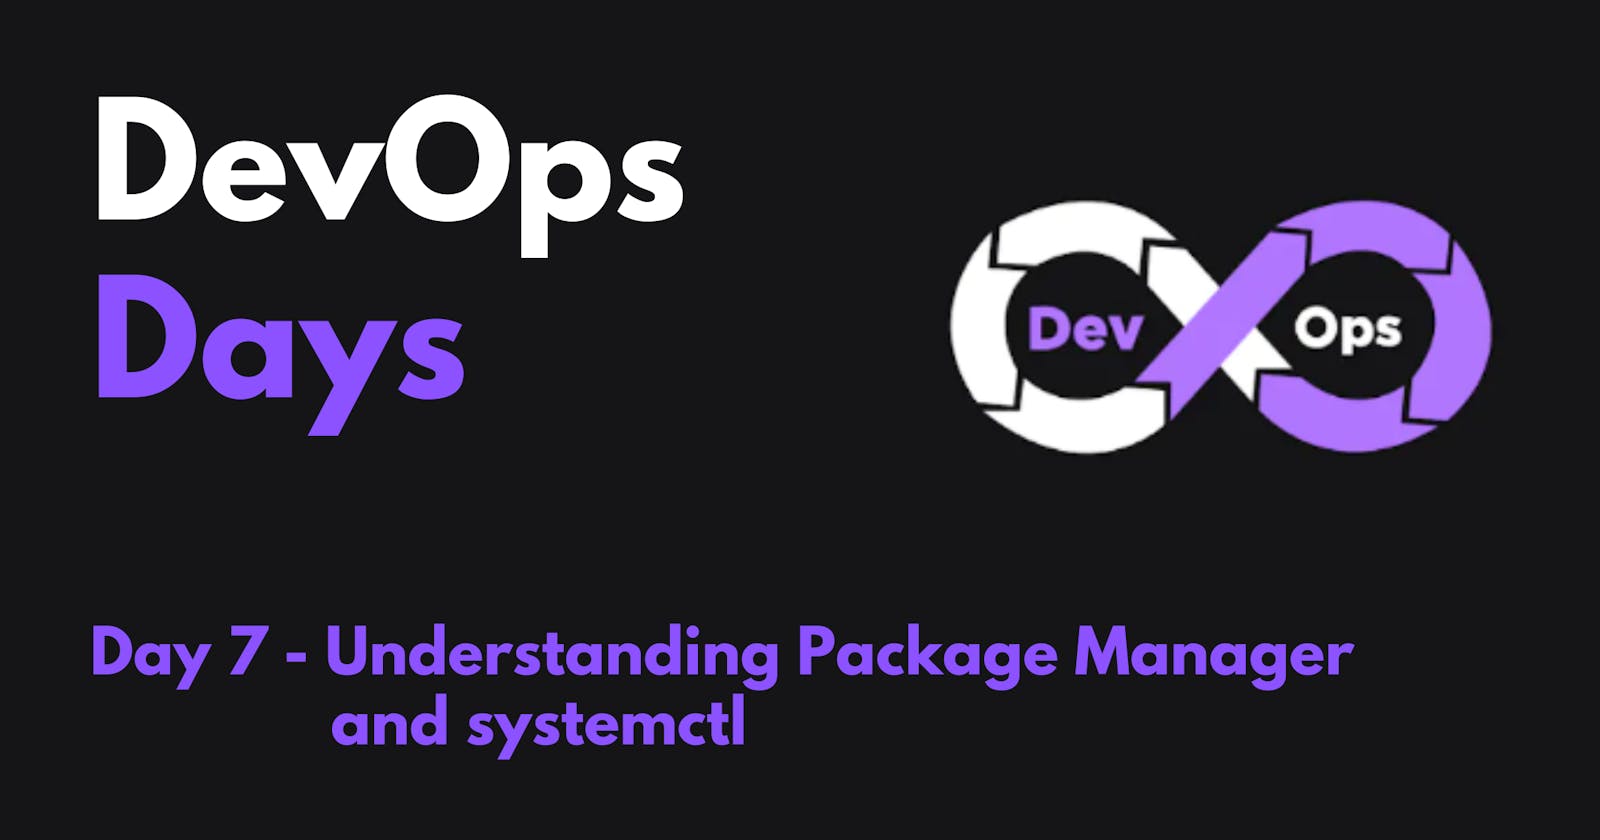 Day 7 - Understanding Package Manager and systemctl